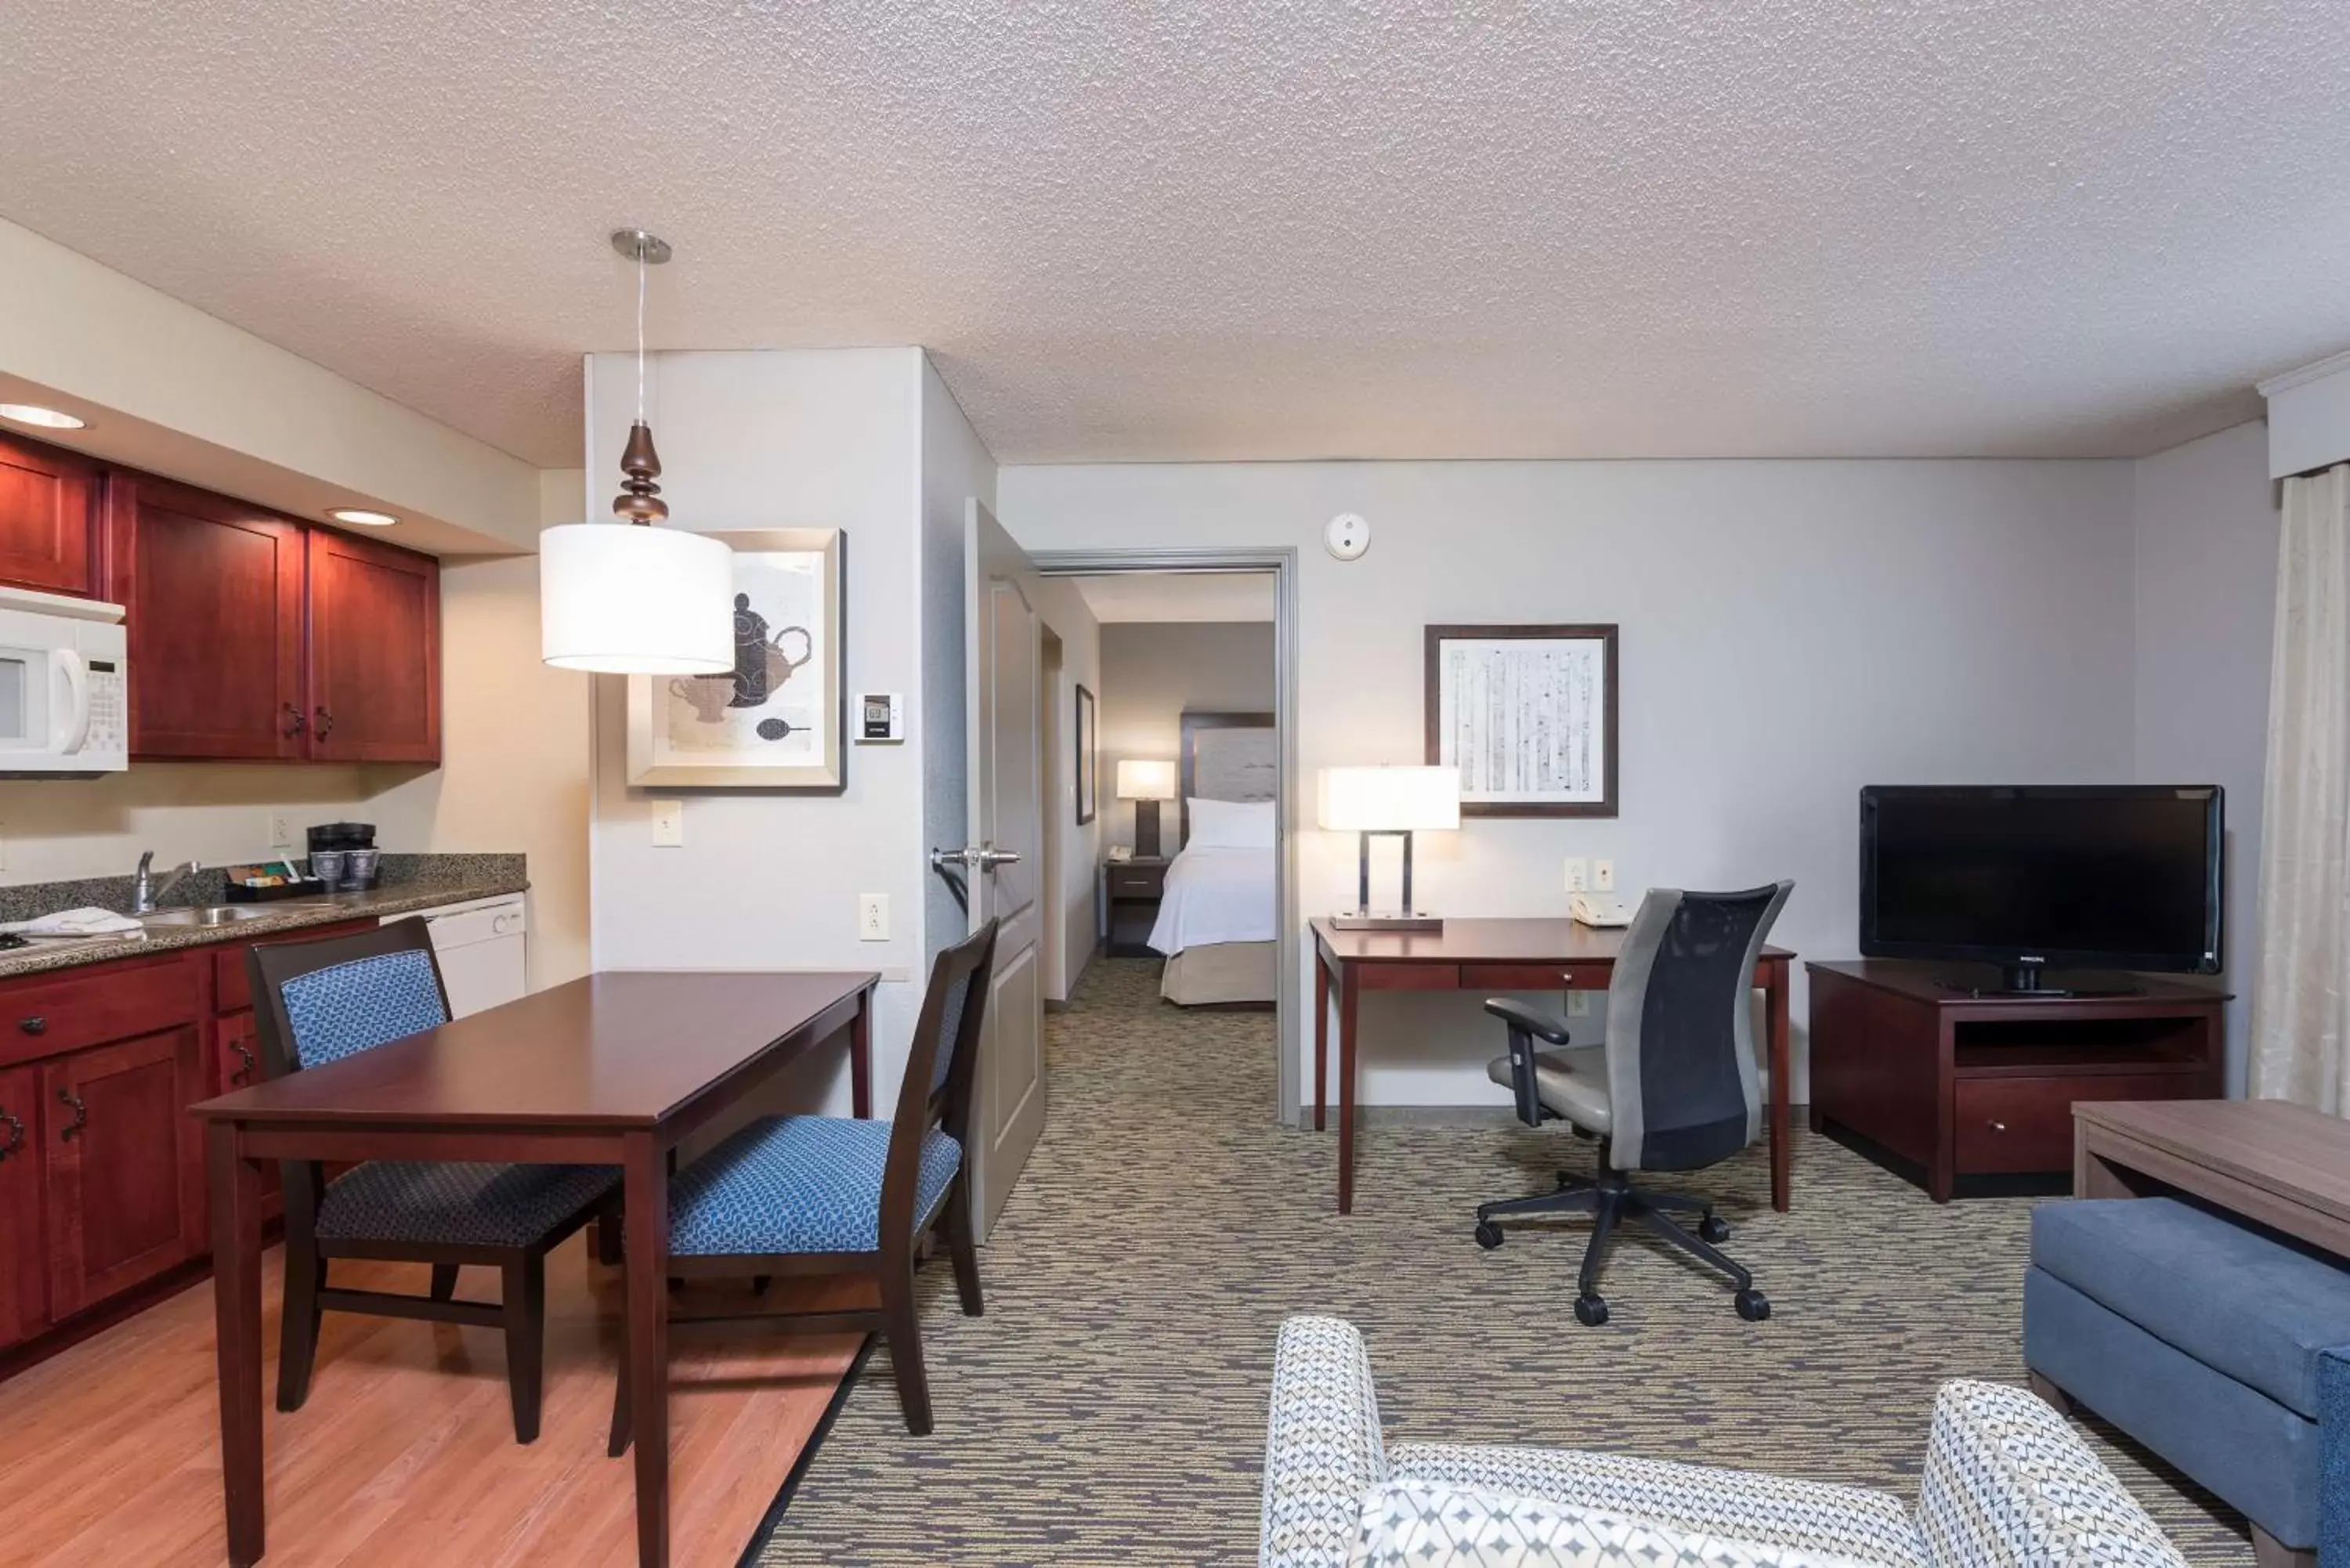 Bedroom, TV/Entertainment Center in Homewood Suites by Hilton Bloomington